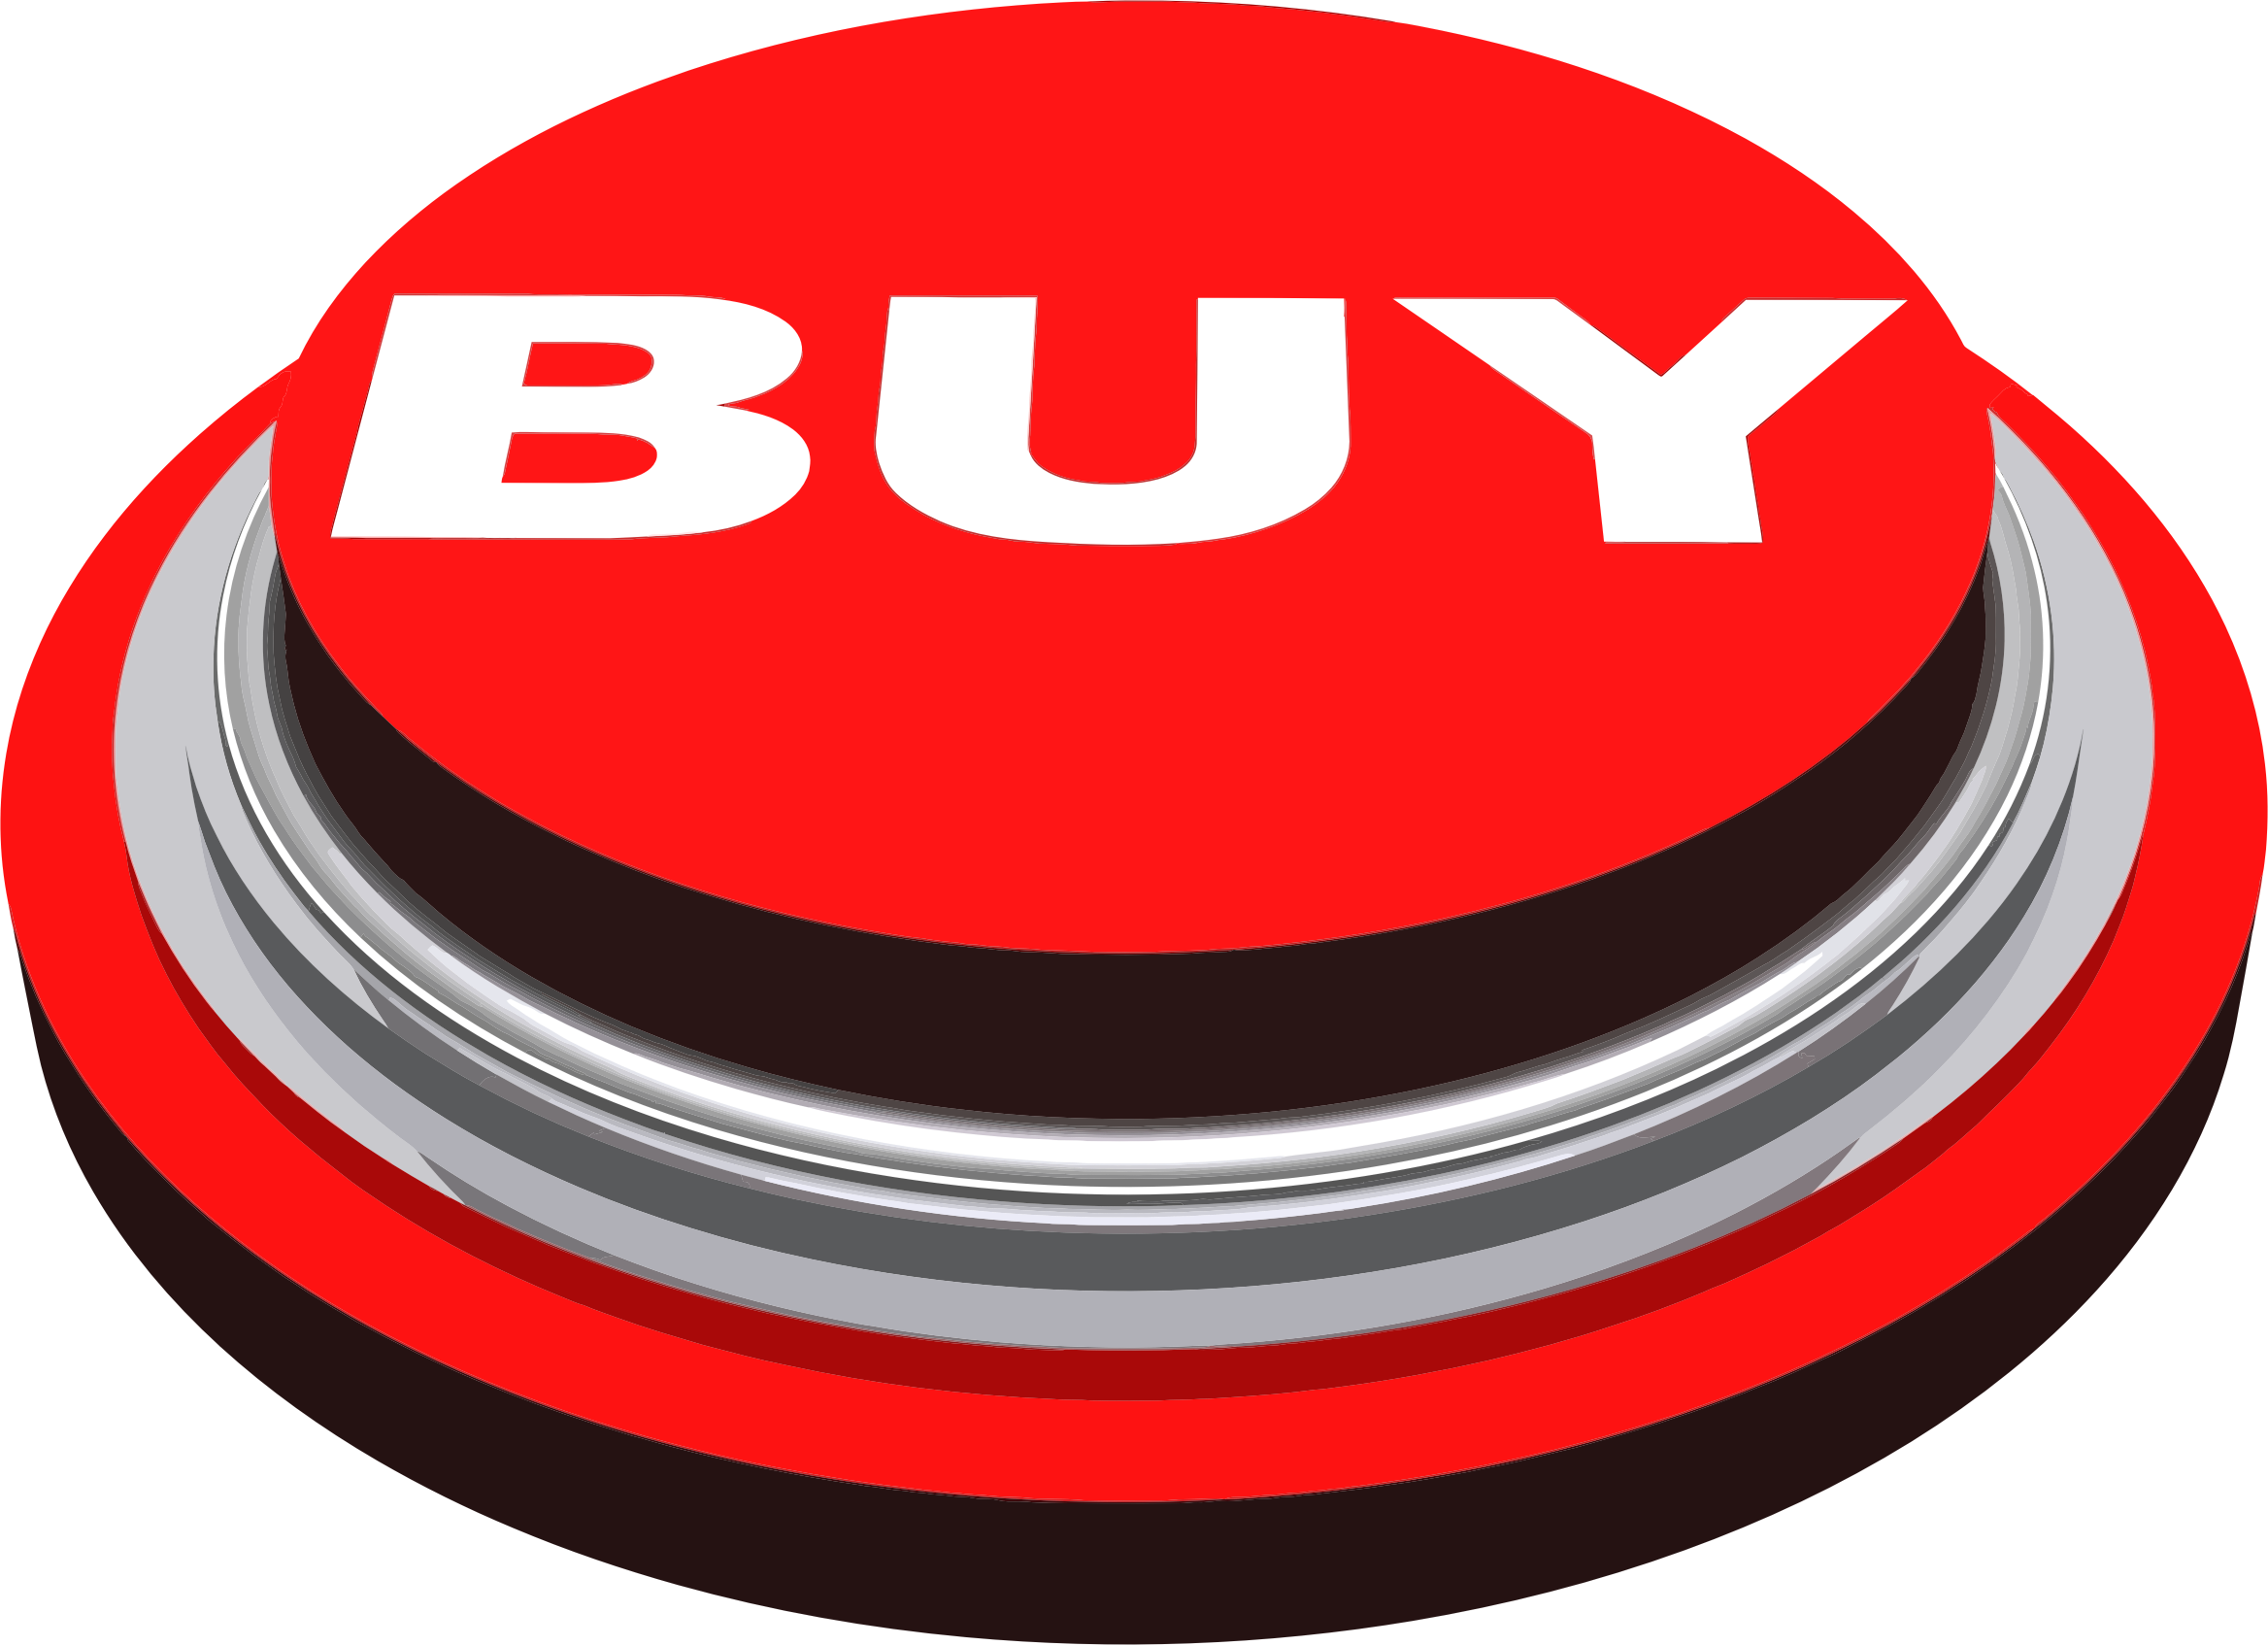 Big Image - Buy Button Clipart (2336x1694)